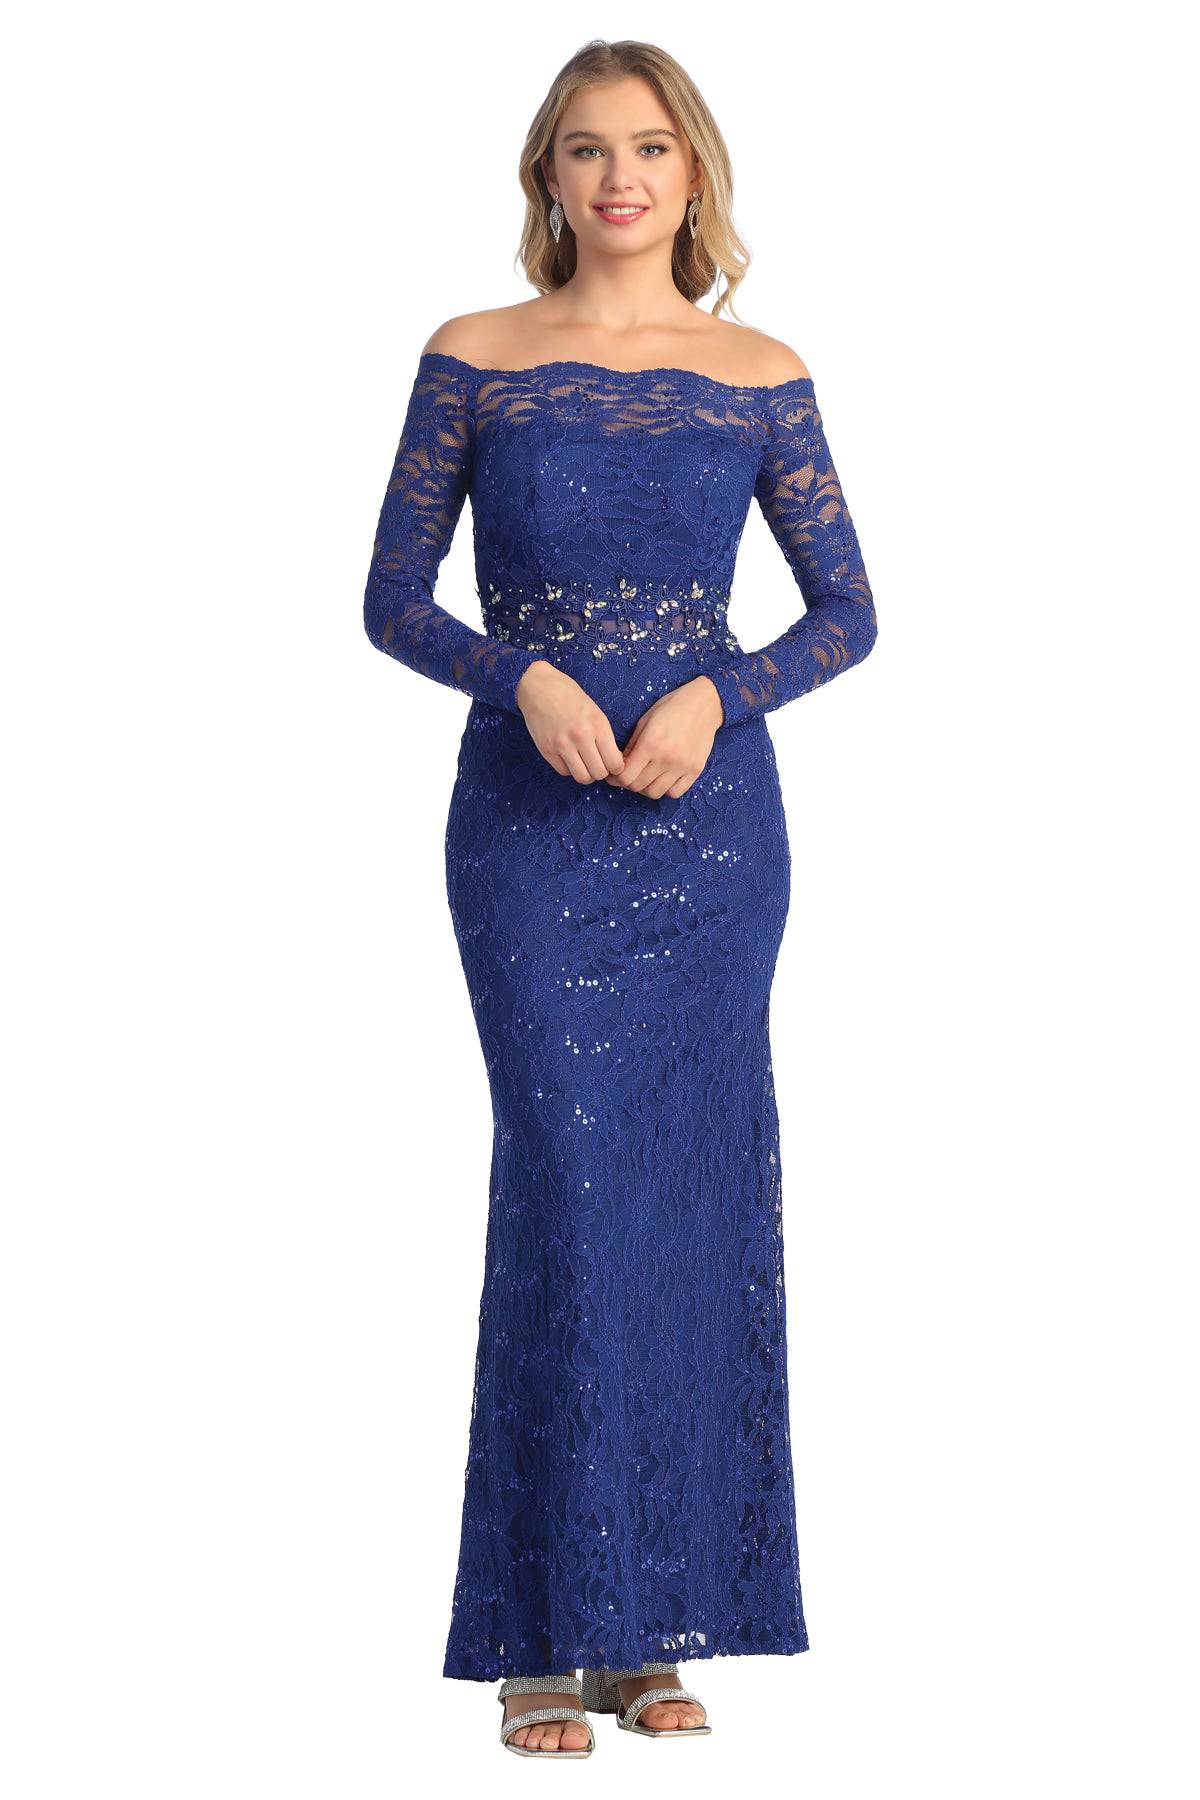 Cindy Collection 1563 Long Sleeve Lace Dress - NORMA REED